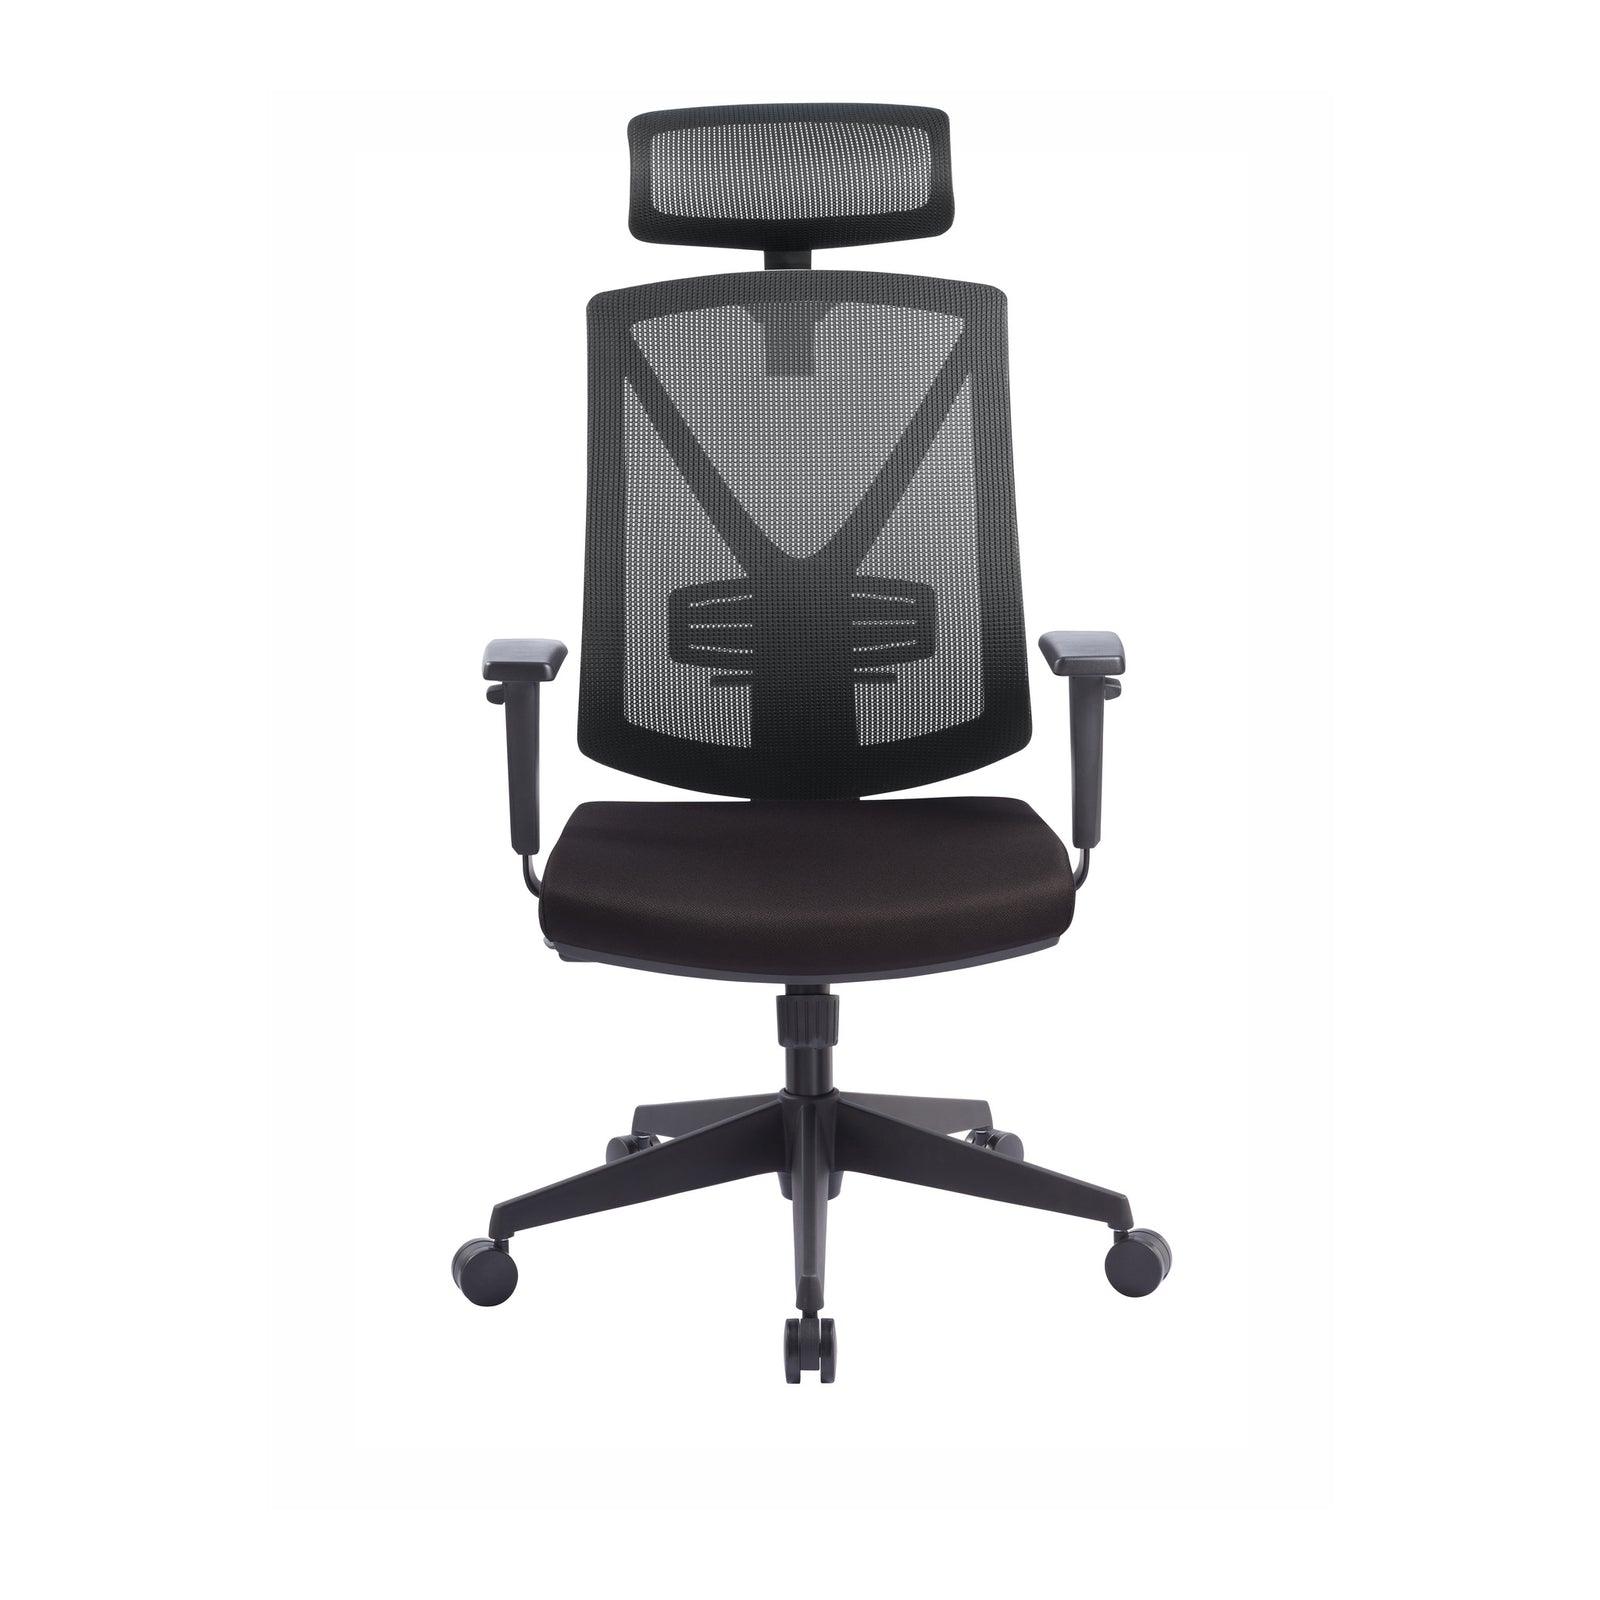 Mesh Ergonomic Office Chair with Headrest - Black - Office/Gaming ChairsOC8256-UN 3